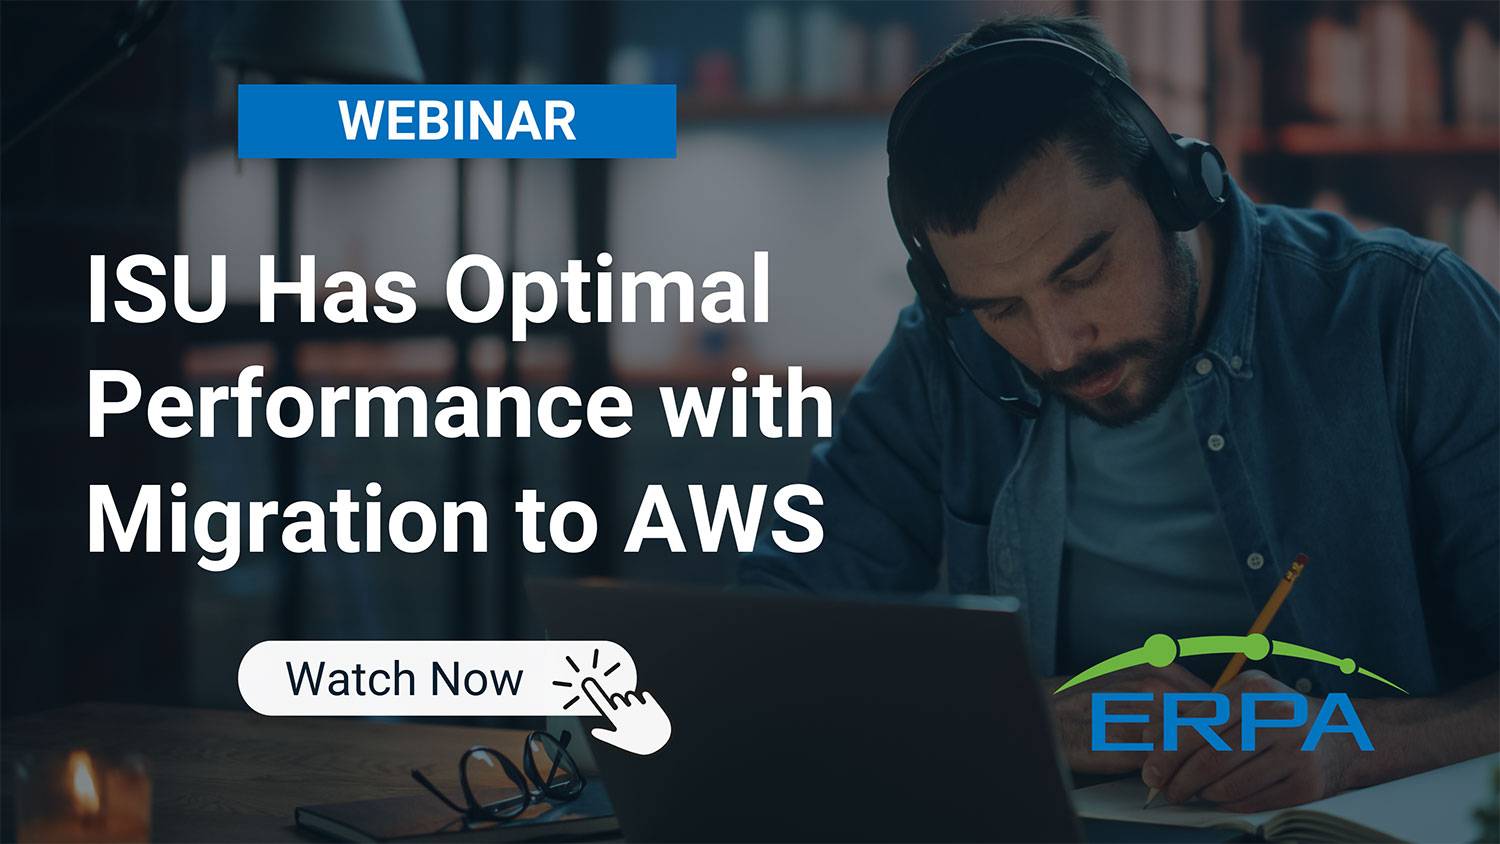 ERPA Webinar: Illinois State University Experiences Optimal Performance with Migration to AWS with ERPA